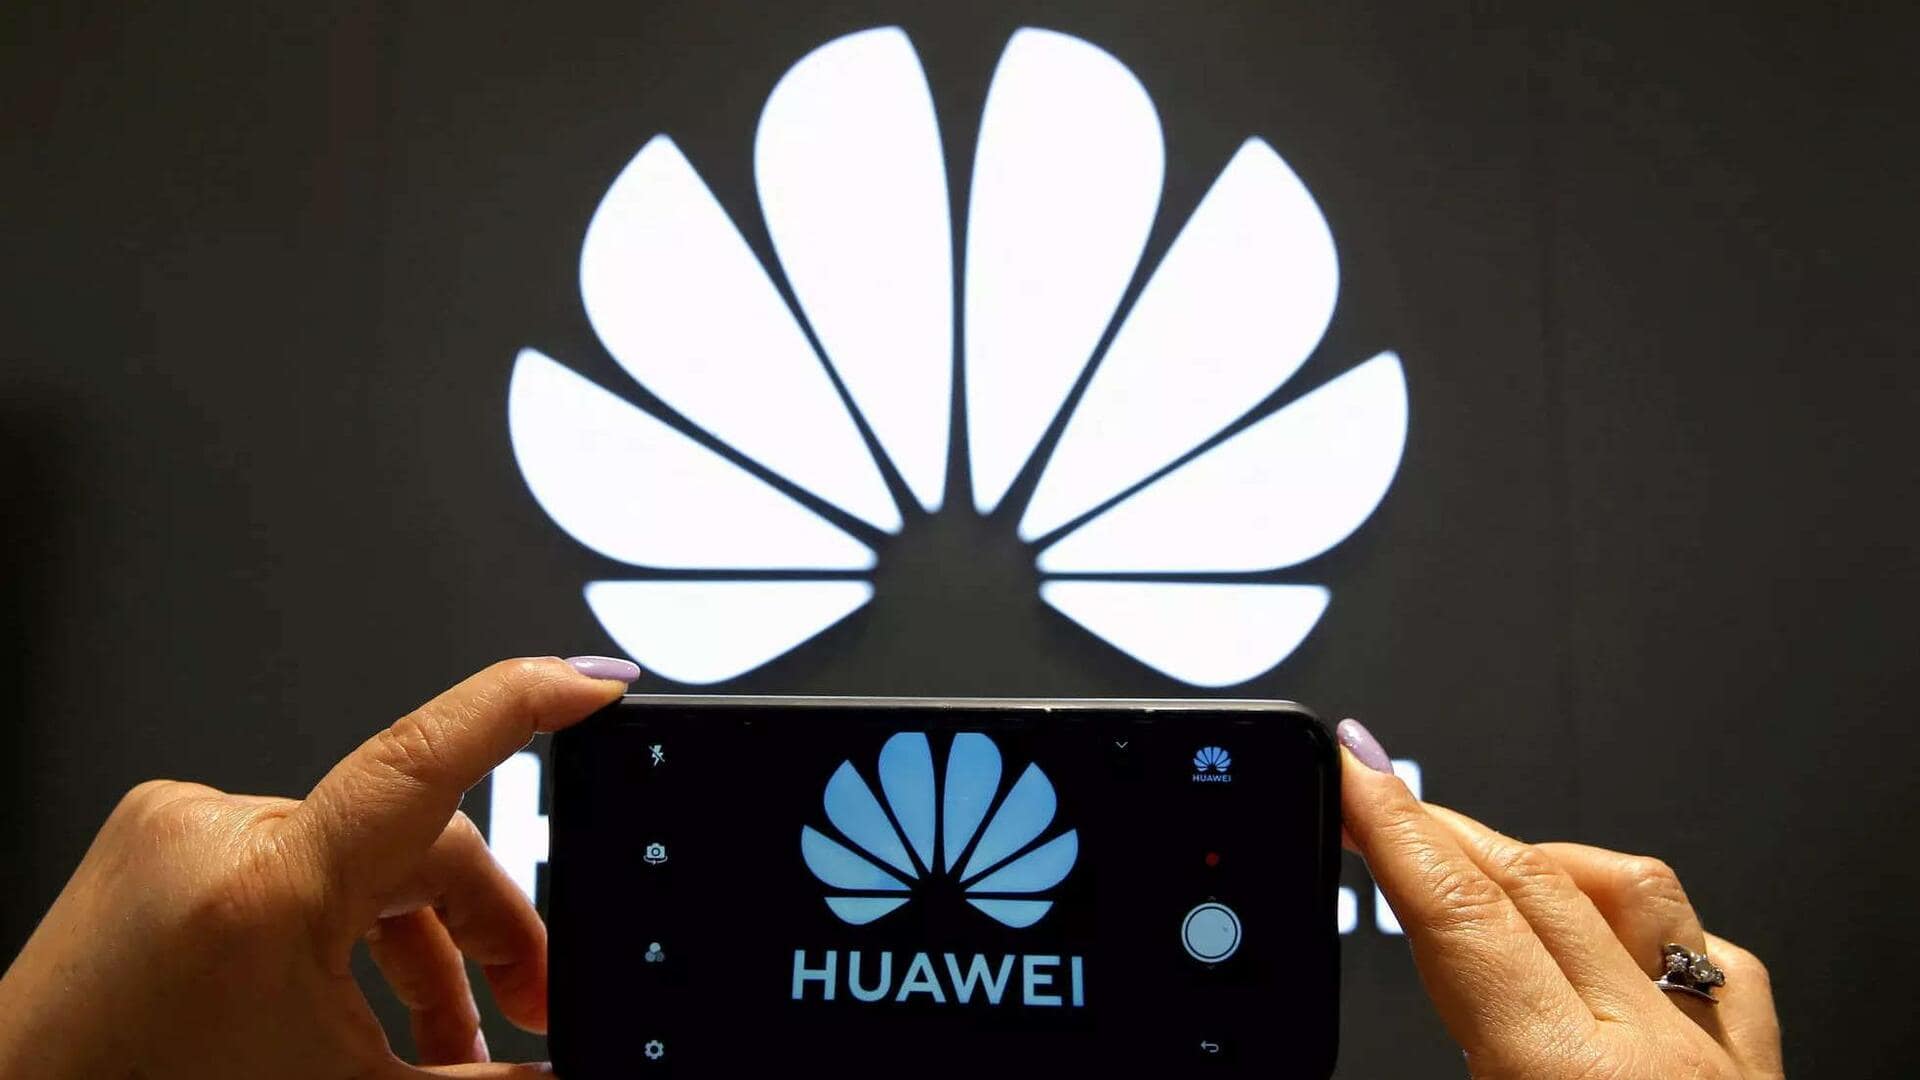 Huawei rebounds post US sanctions, expects 9% sales growth